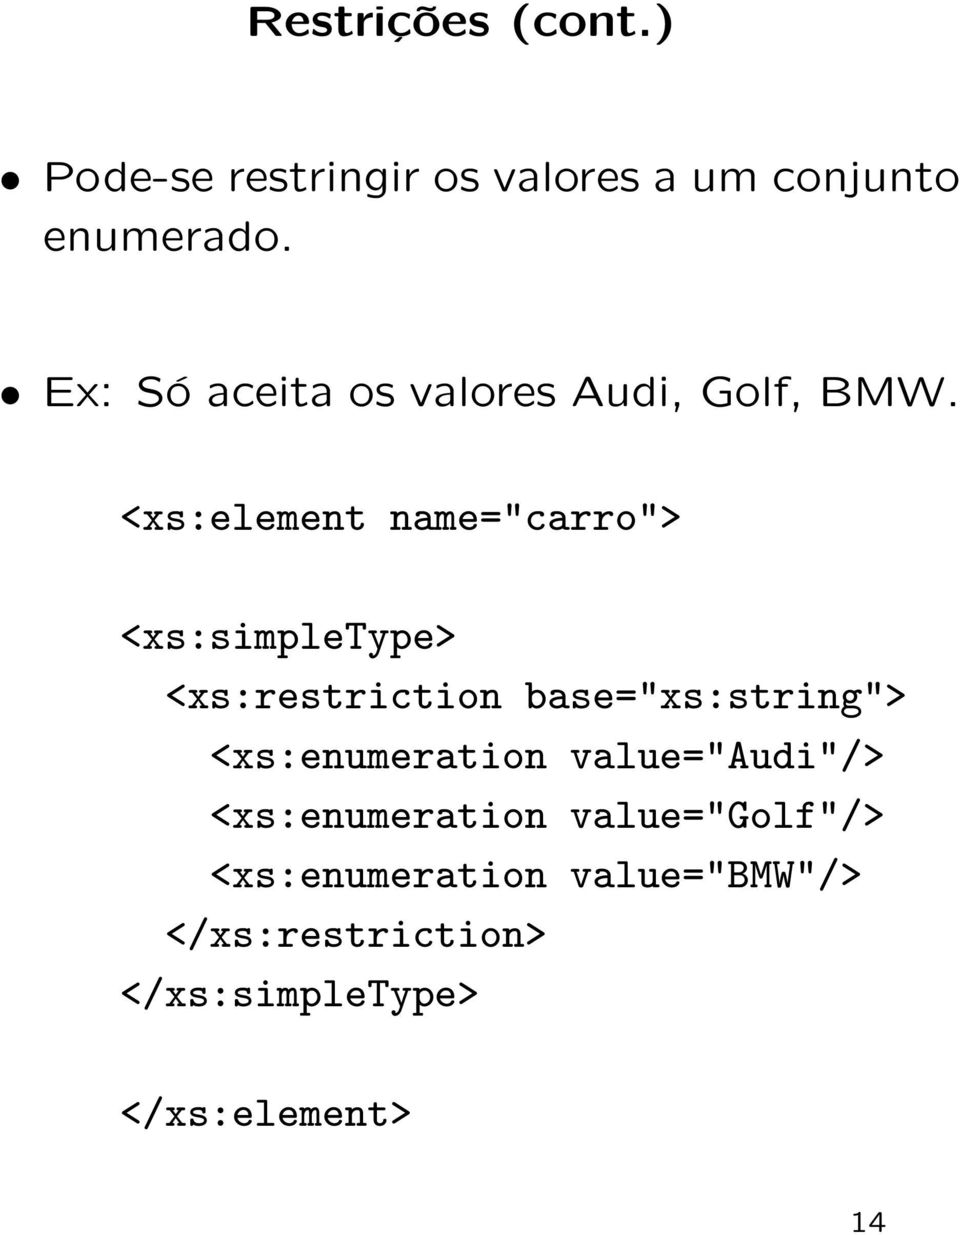 <xs:element name="carro"> <xs:simpletype> <xs:restriction base="xs:string">